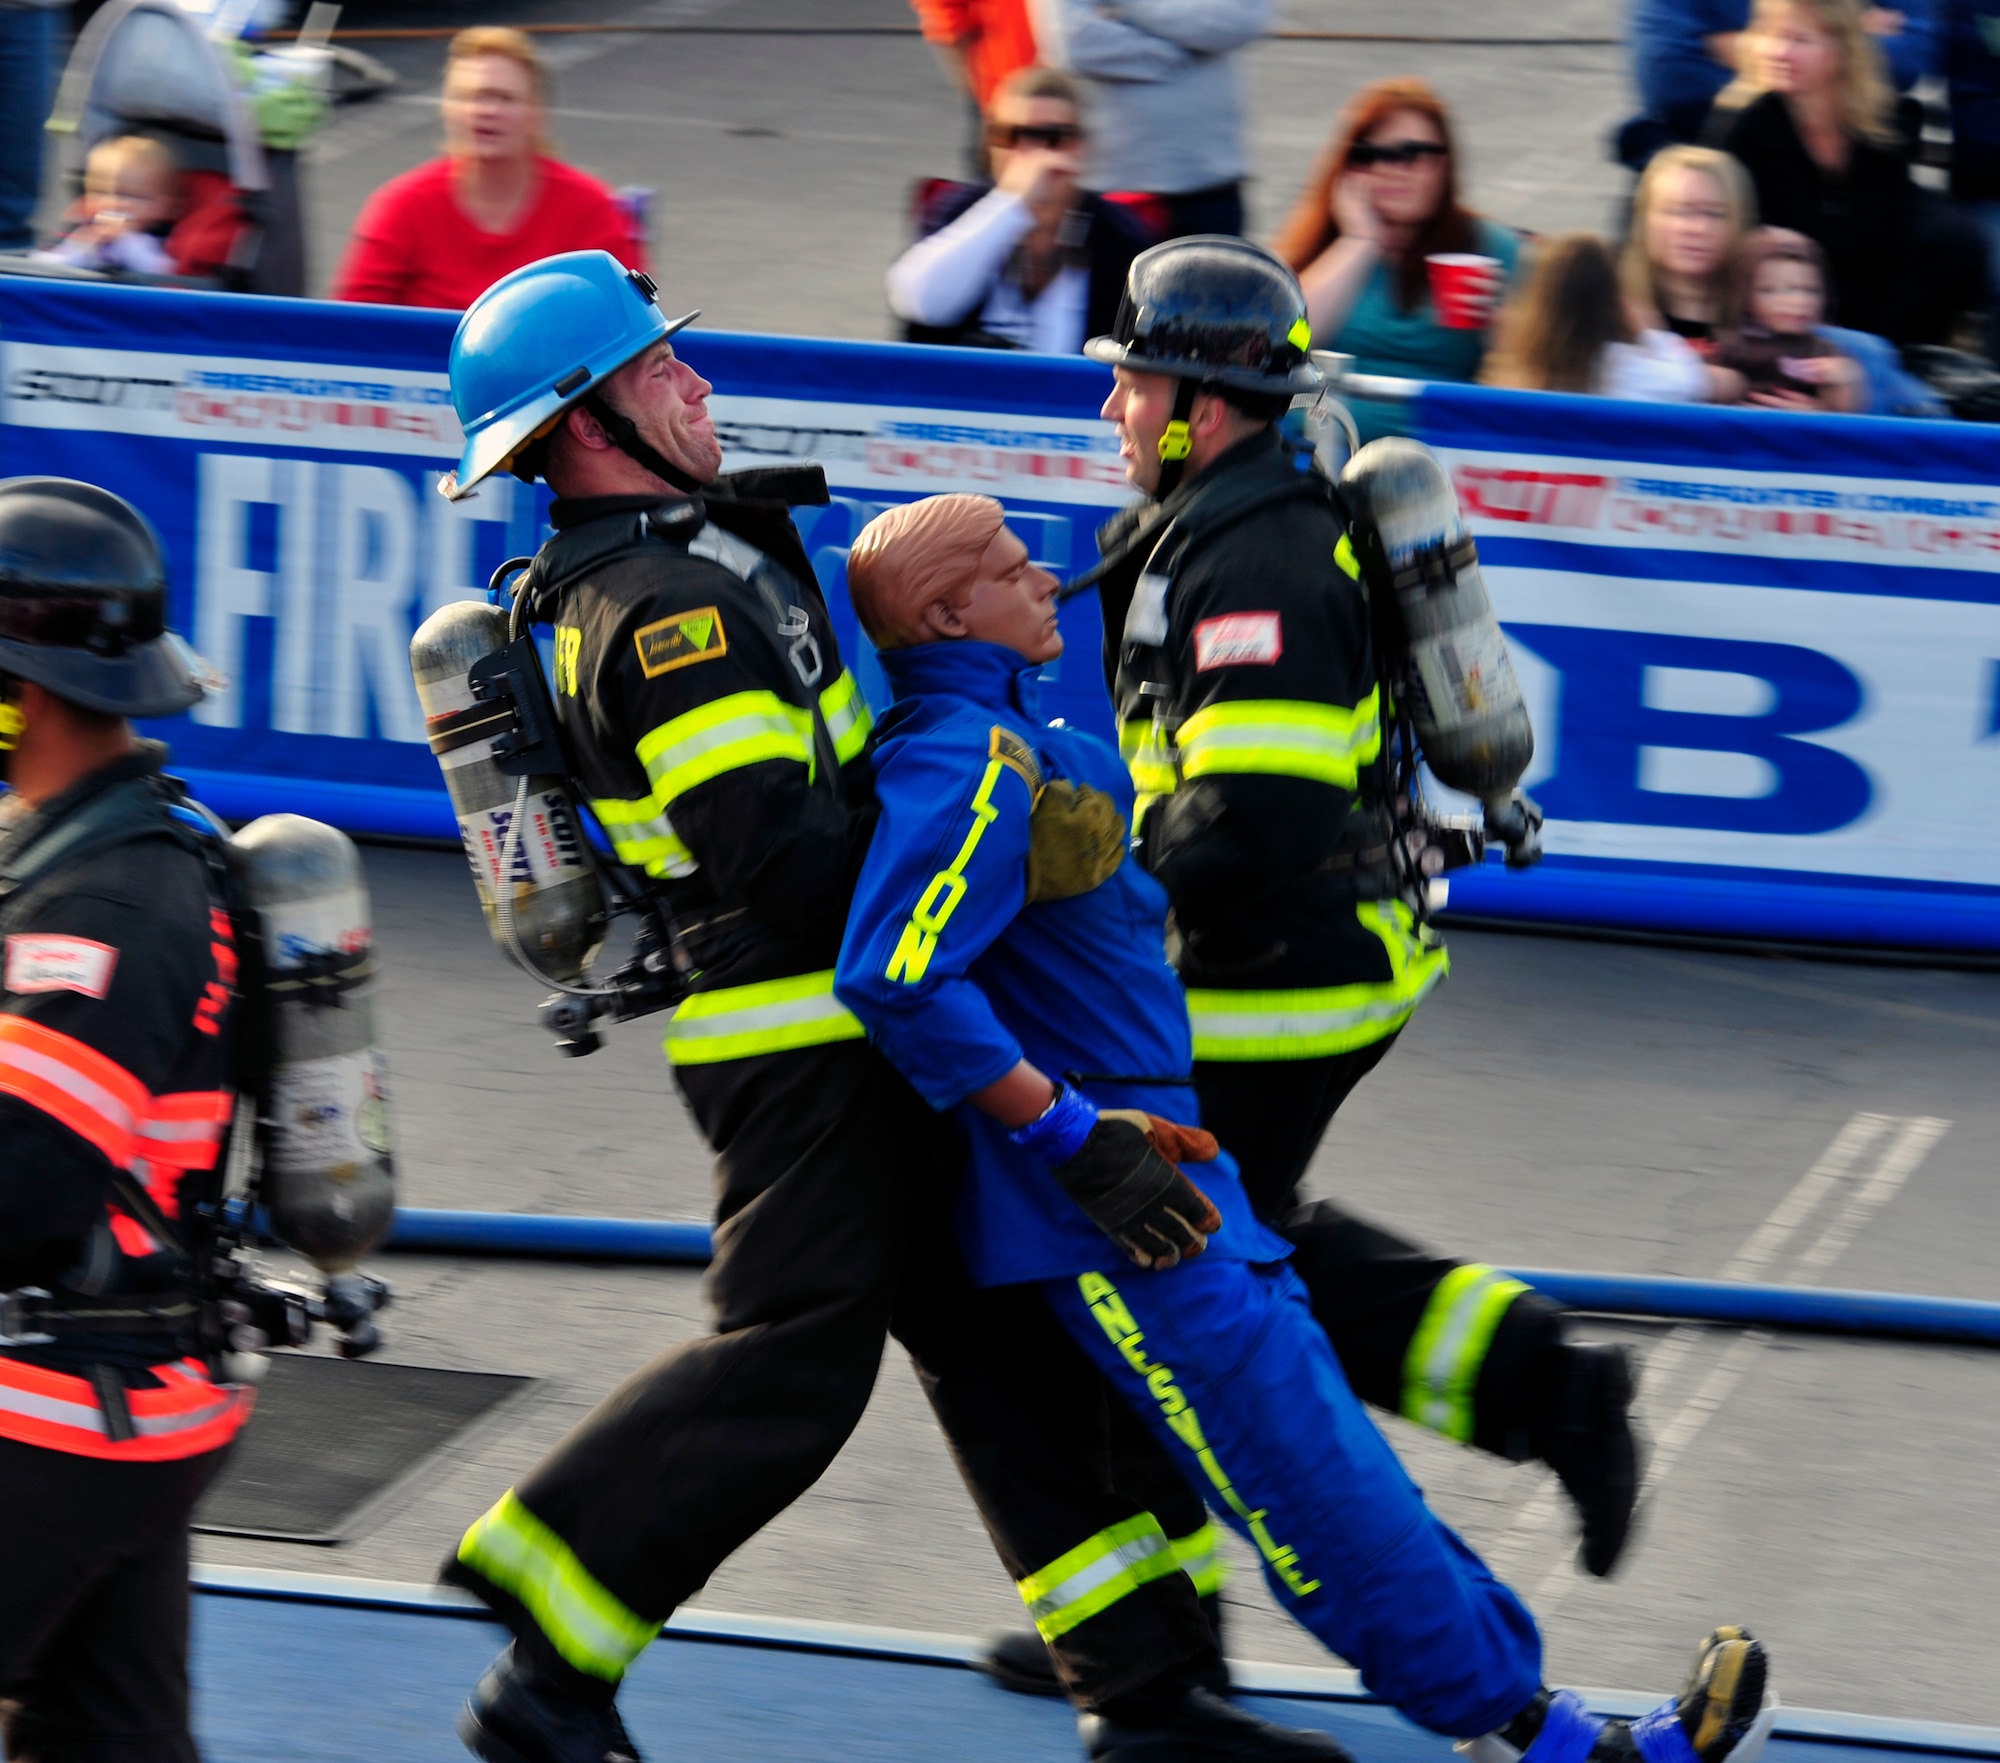 Staff Sgt. Chastin Warner, 20th Civil Engineer Squadron firefighter, drags a 175-pound rescue dummy towards the finish line while Staff Sgt. Steven Thomas, 20th CES firefighter, encourages him at the Scott Firefighter Combat Challenge world competition at Myrtle Beach, S.C. Nov. 15, 2011. The 20th CES firefighters competed againt 180 firefighter teams from across the world. (U.S. Air Force photo/Airman 1st Class Daniel Phelps/Released)